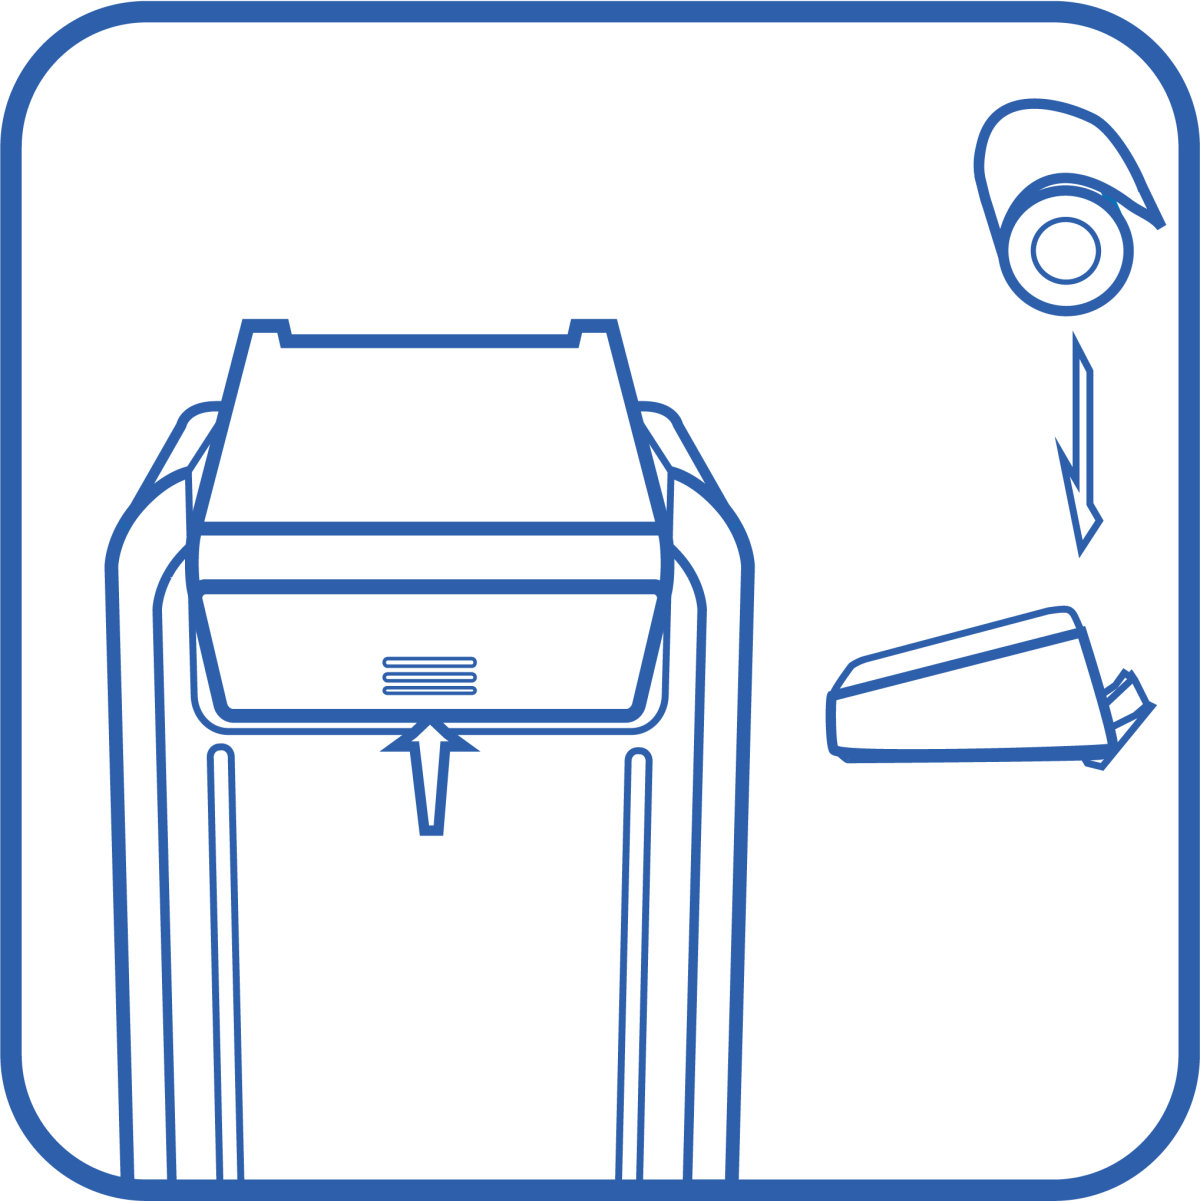 icon of reloading a paper roll into the 3g printer